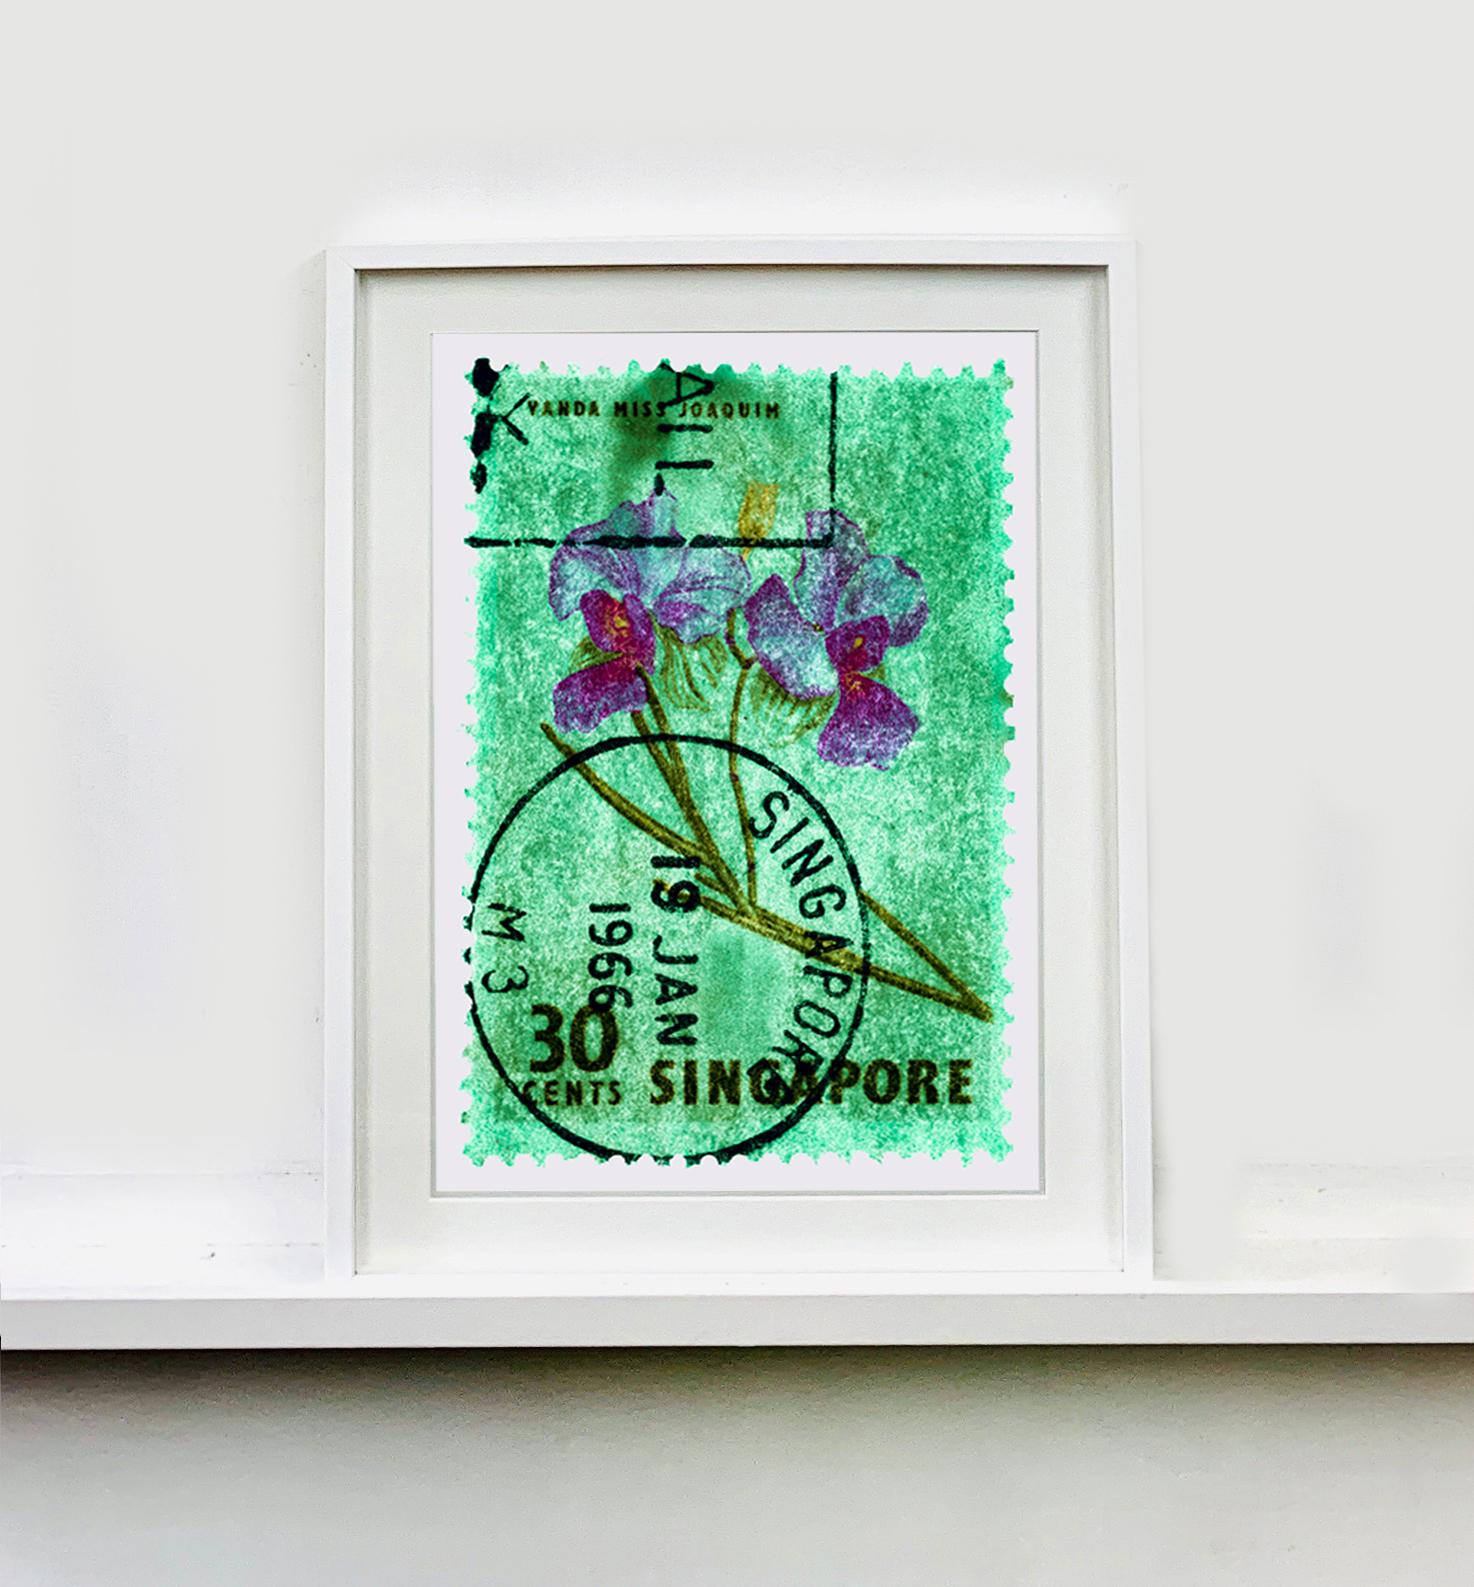 Singapore Stamp Collection, 30c Singapore Orchid Green - Floral color photo For Sale 4